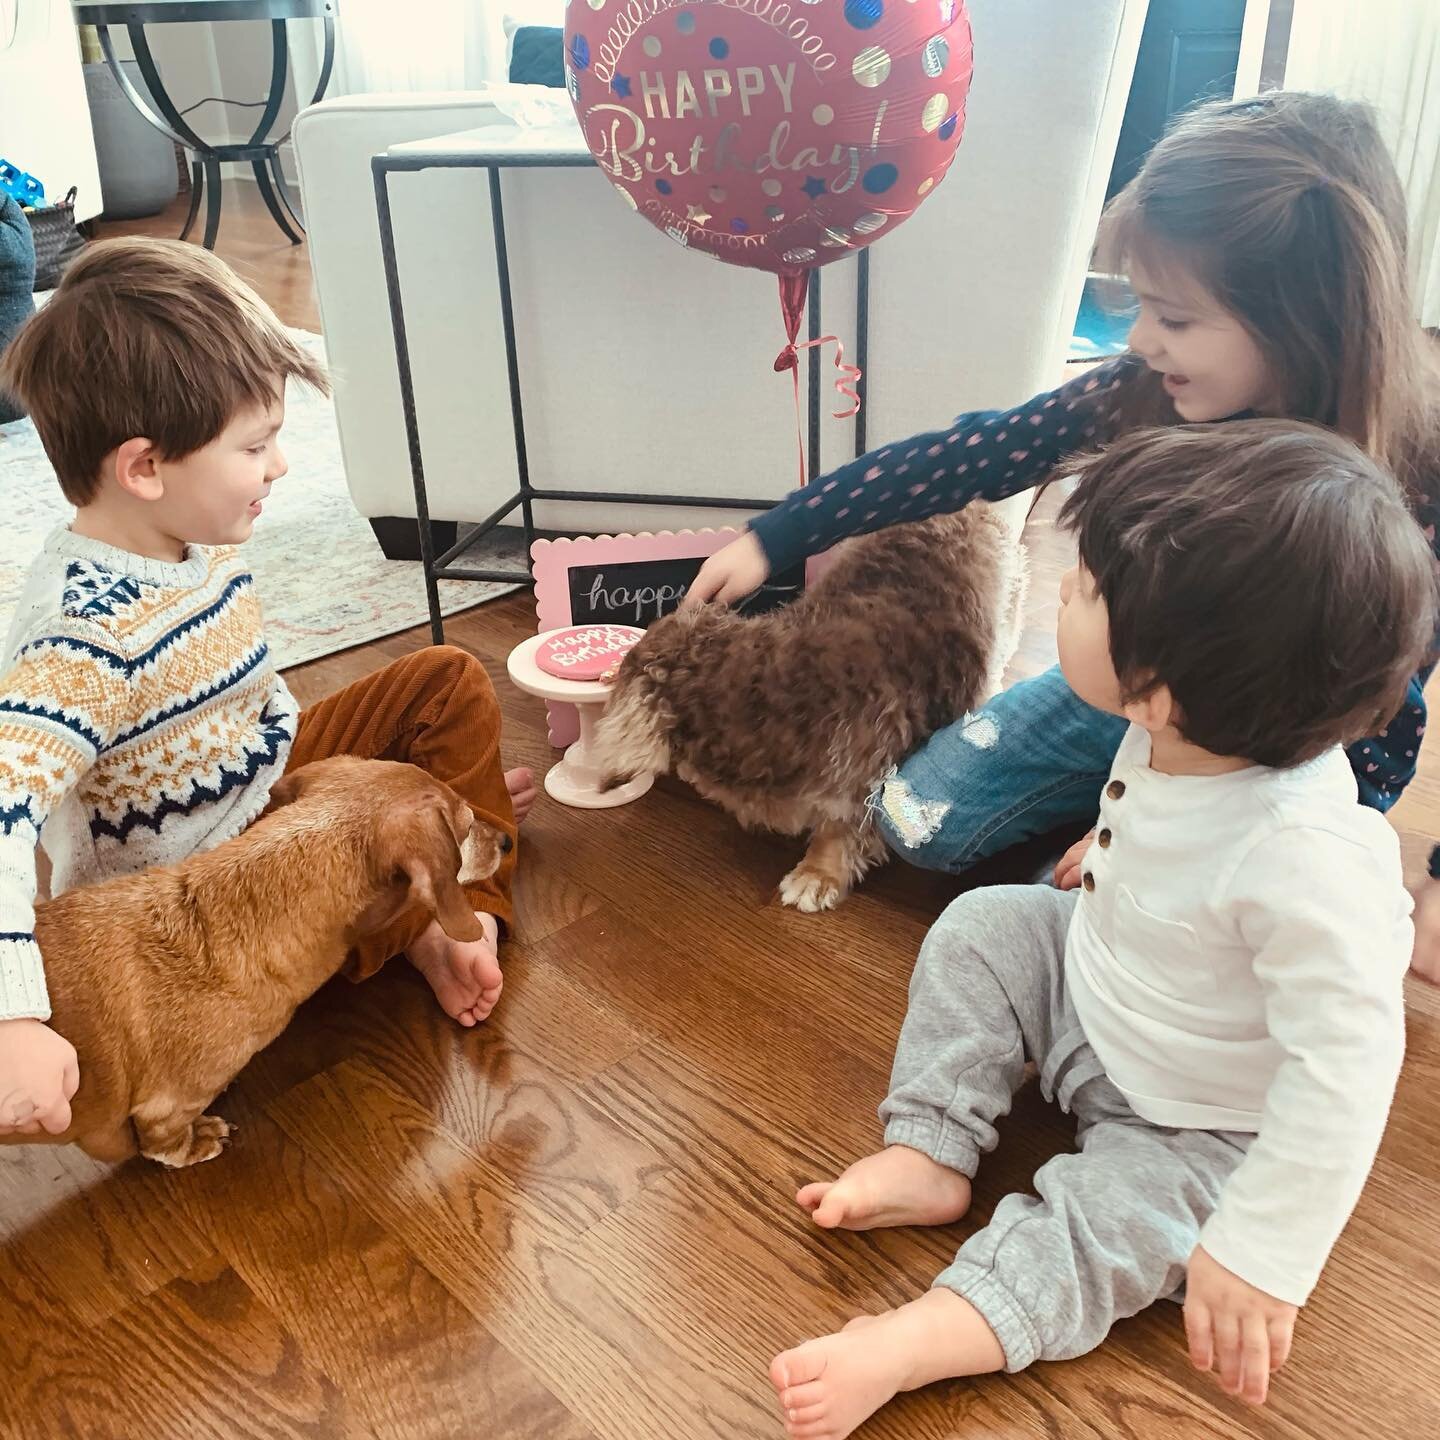 Happy 9th birthday to our sweet yet super OCD and crazy dachshund LUCY! We love you so much ❤️ 

(Lucy is the one with long hair!)